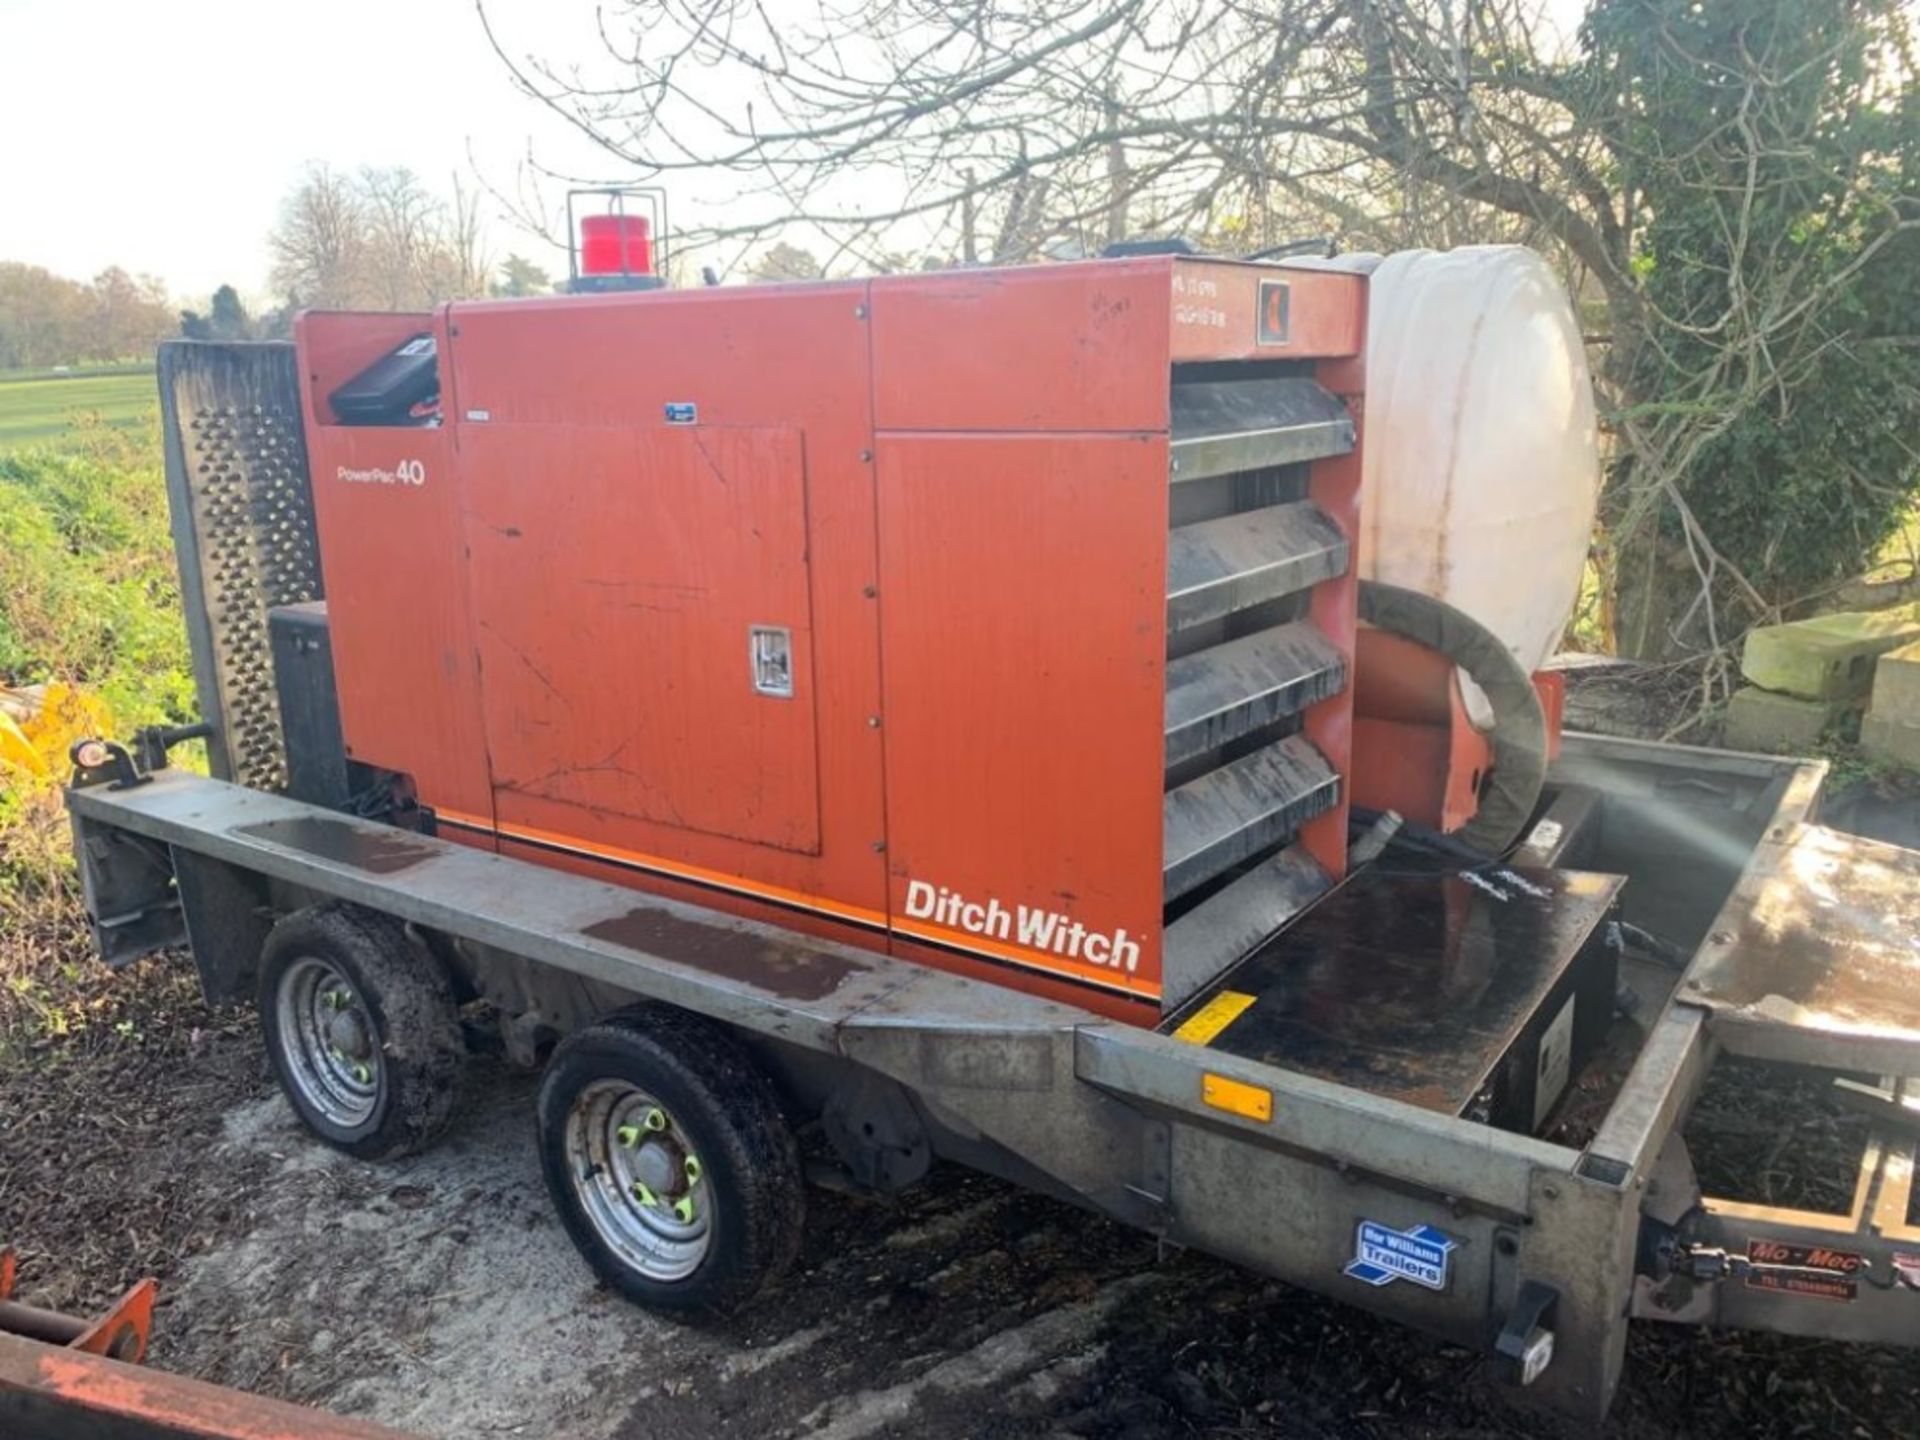 DITCH WITCH JET TRAC 440 DIRECTIONAL DRILLING BORING MACHINE. SUPPLIED WITH POWER PAC 40 HYDRAULIC - Image 5 of 9